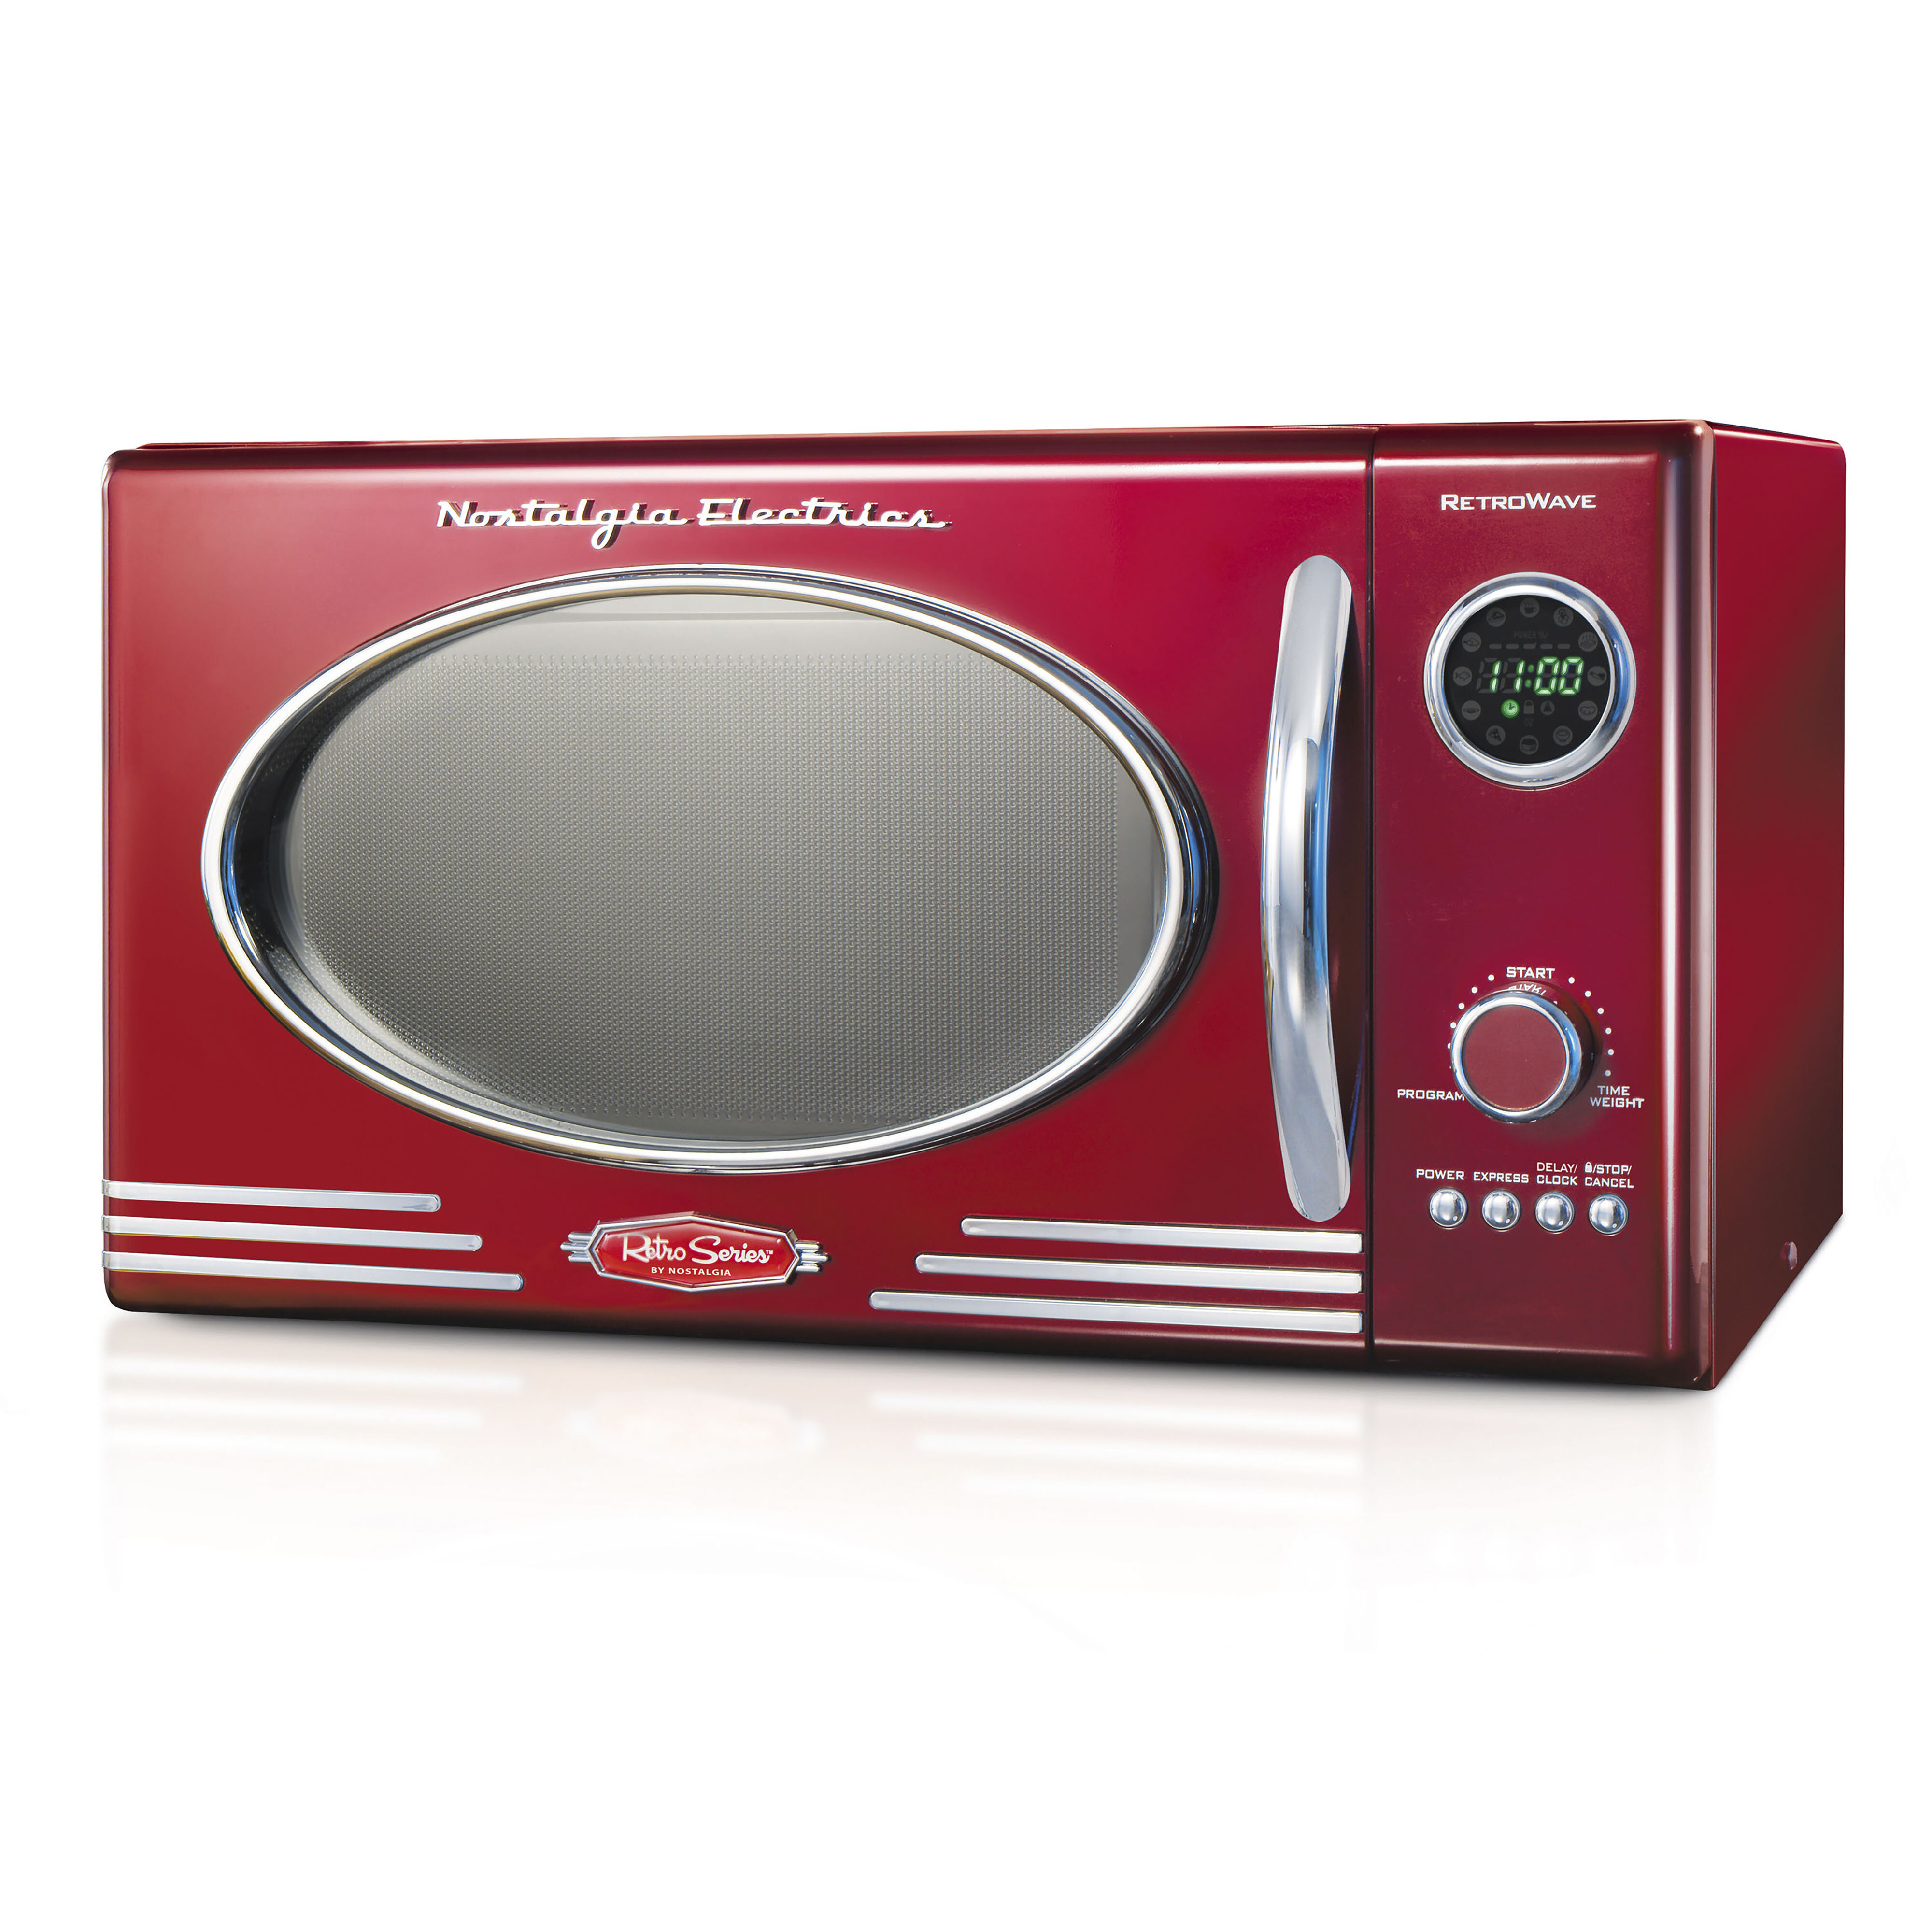  Nostalgia Retro Compact Countertop Microwave Oven - 0.7 Cu. Ft.  - 700-Watts with LED Digital Display - Child Lock - Easy Clean Interior -  Red : Home & Kitchen